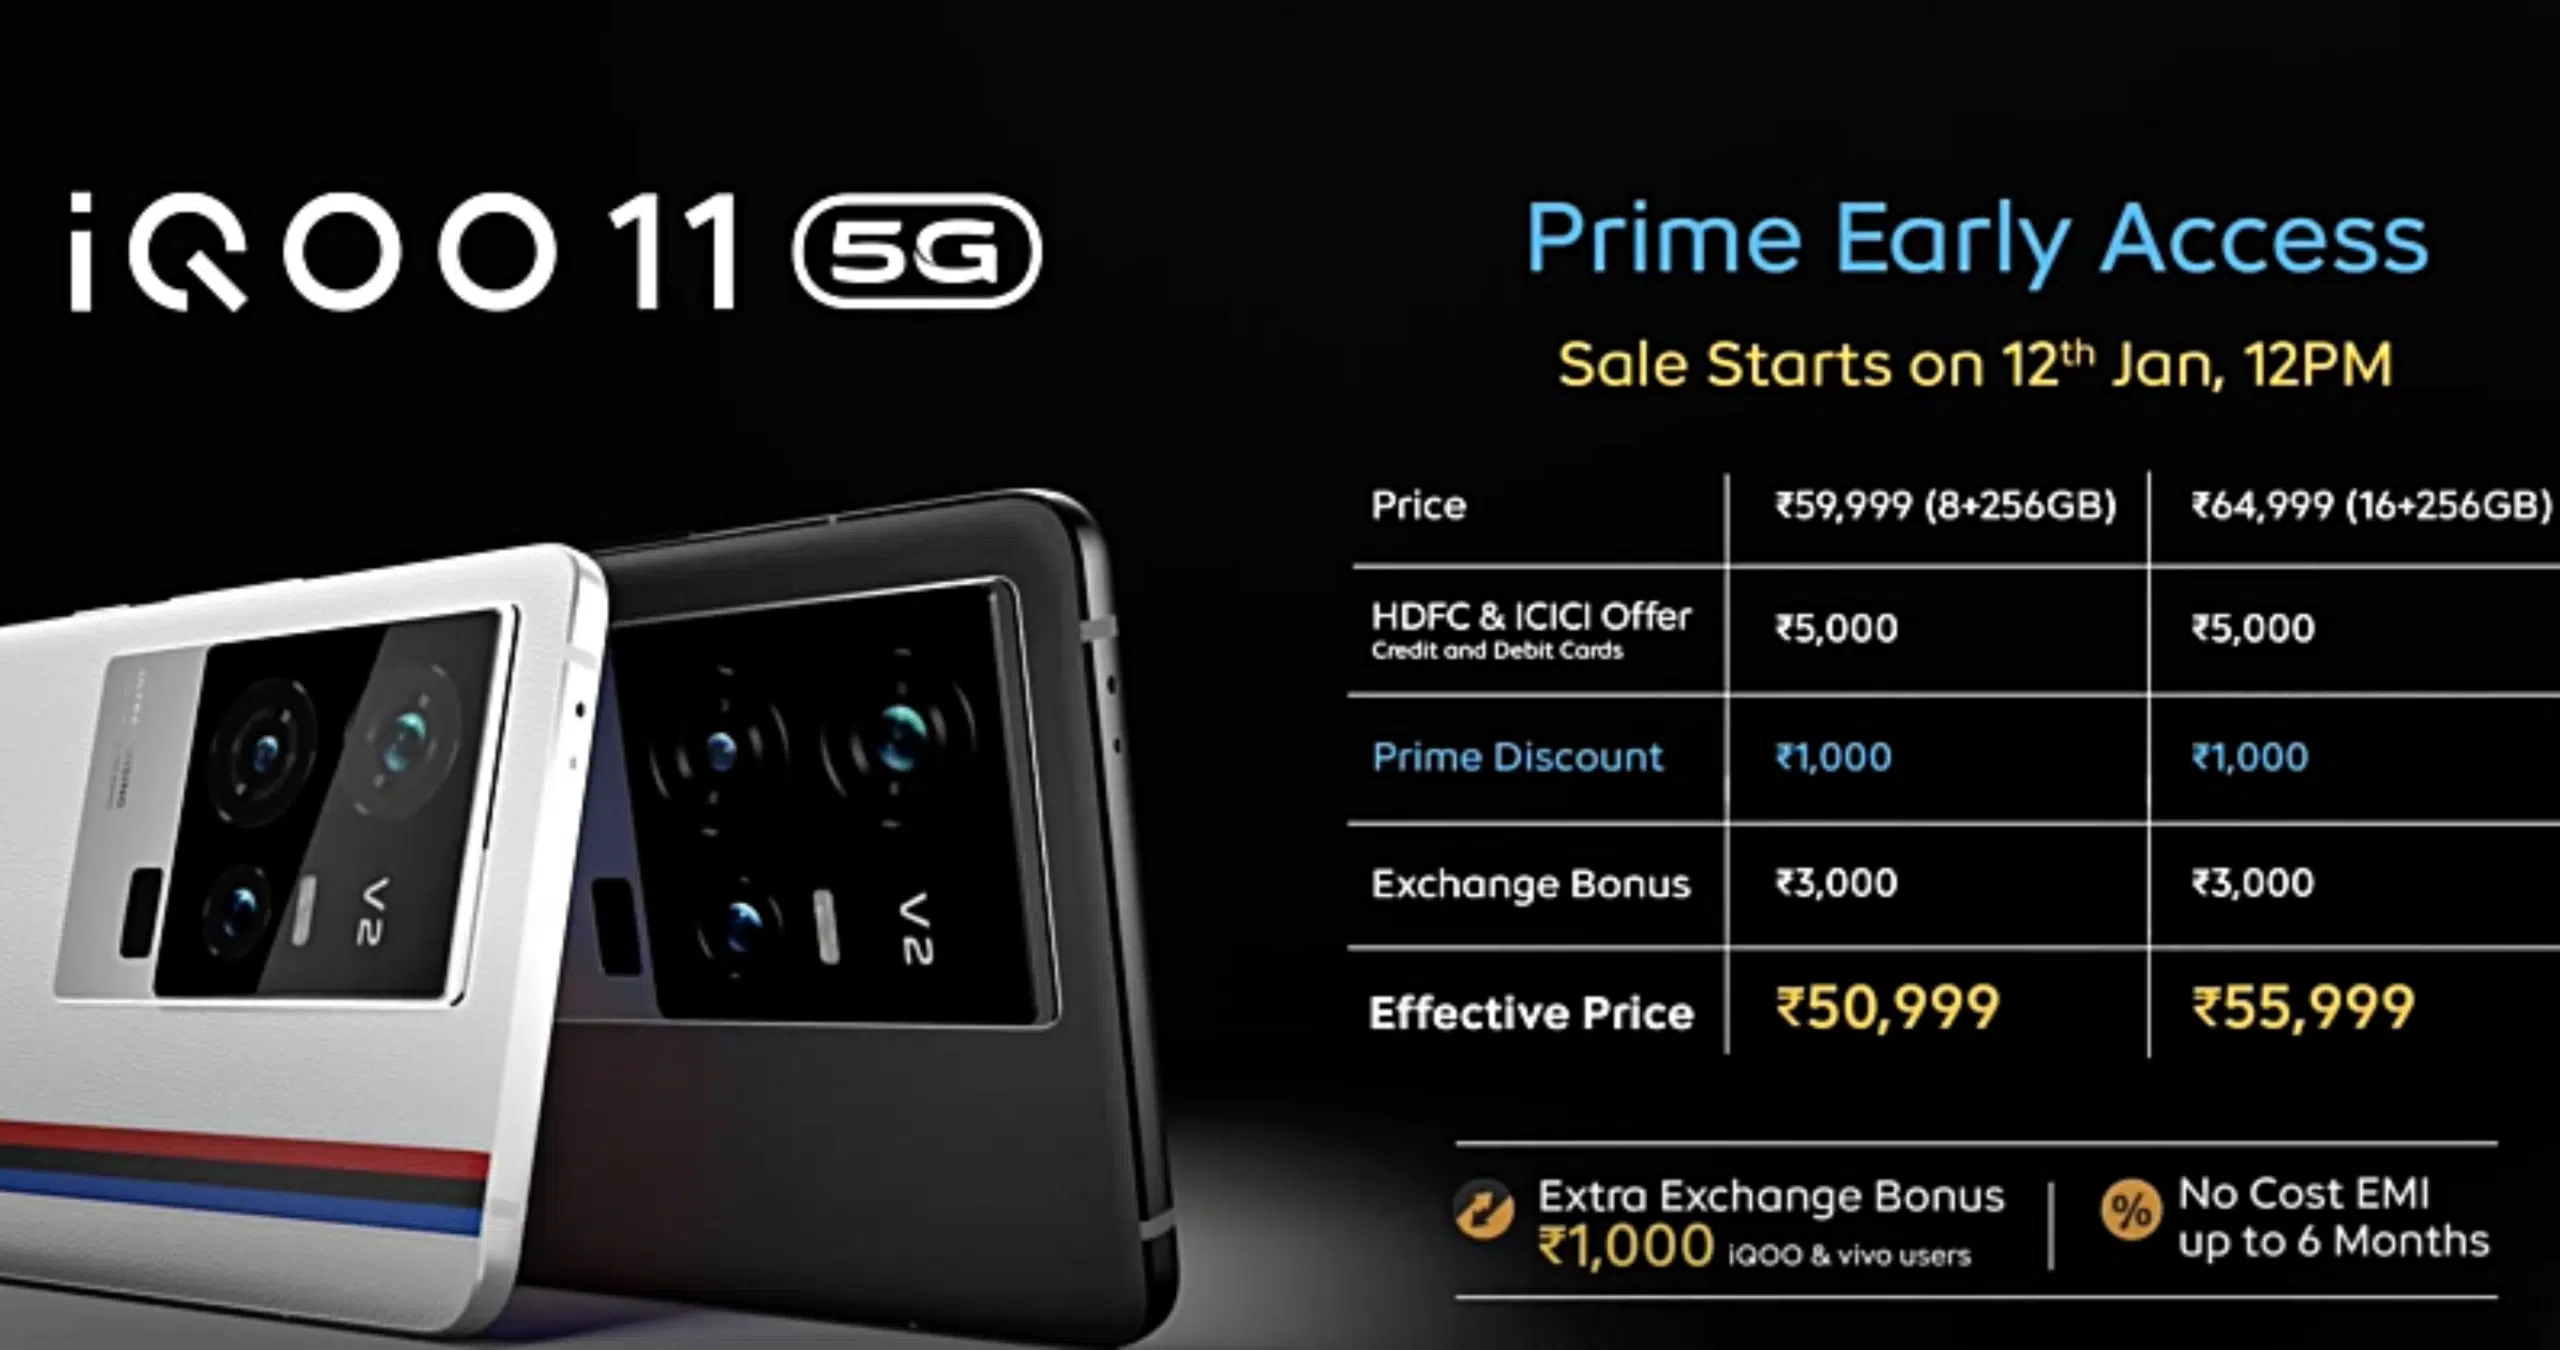 iQOO 11 Price starts from Rs 59,999 for 8GB+256GB